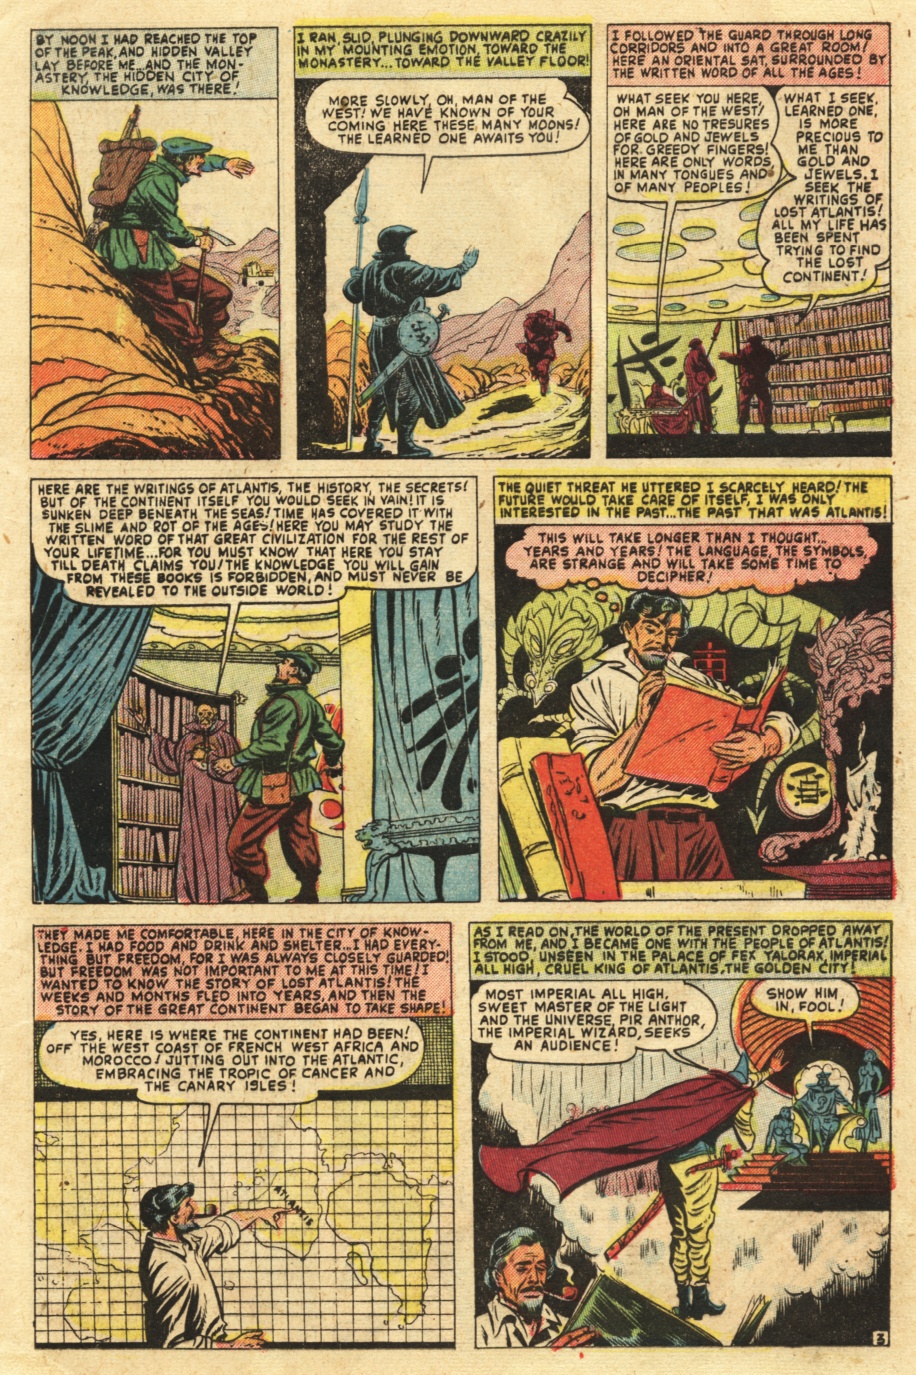 Marvel Tales (1949) 97 Page 4